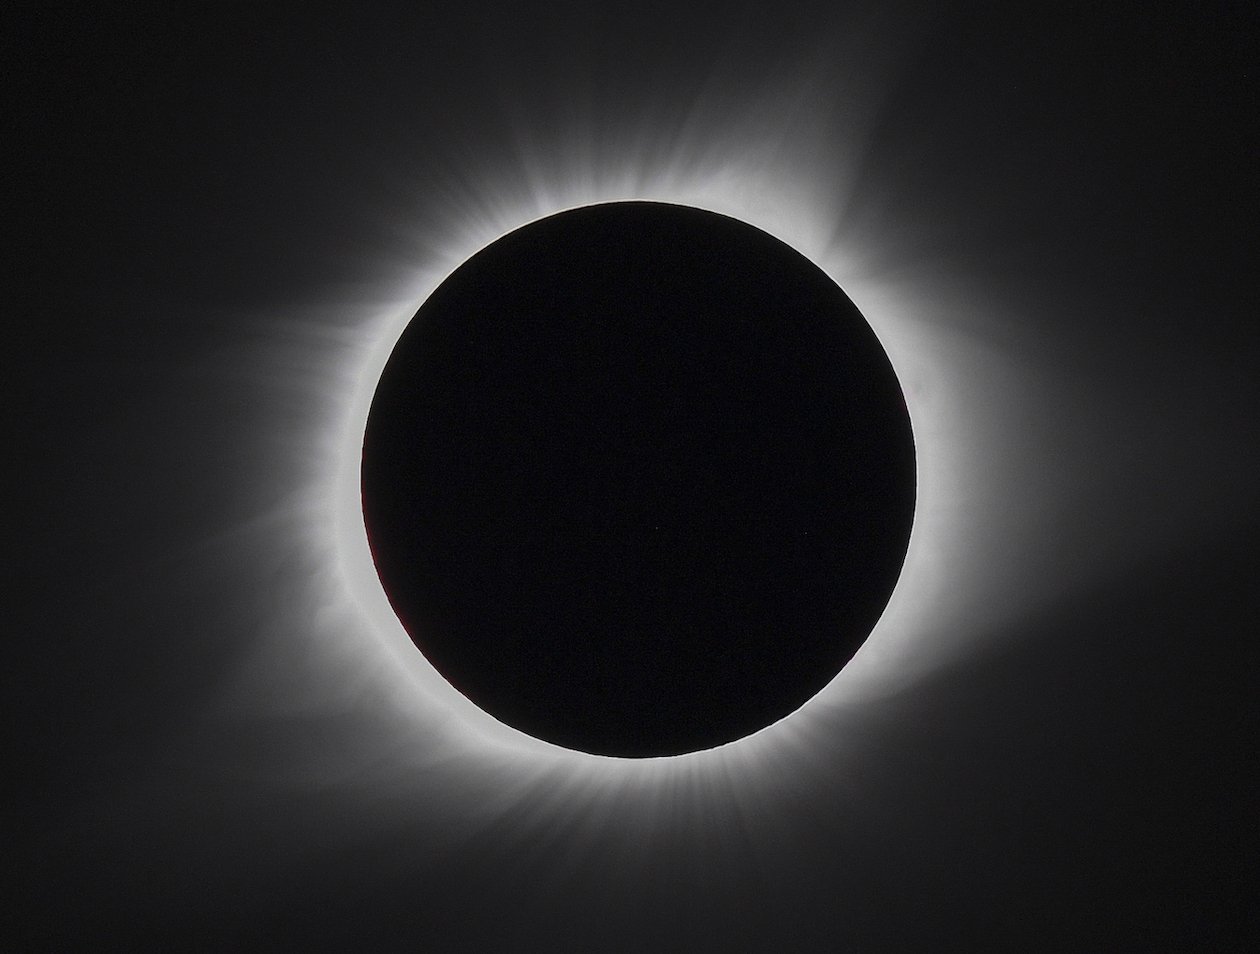 A total solar eclipse professionally photographed in August 2017.